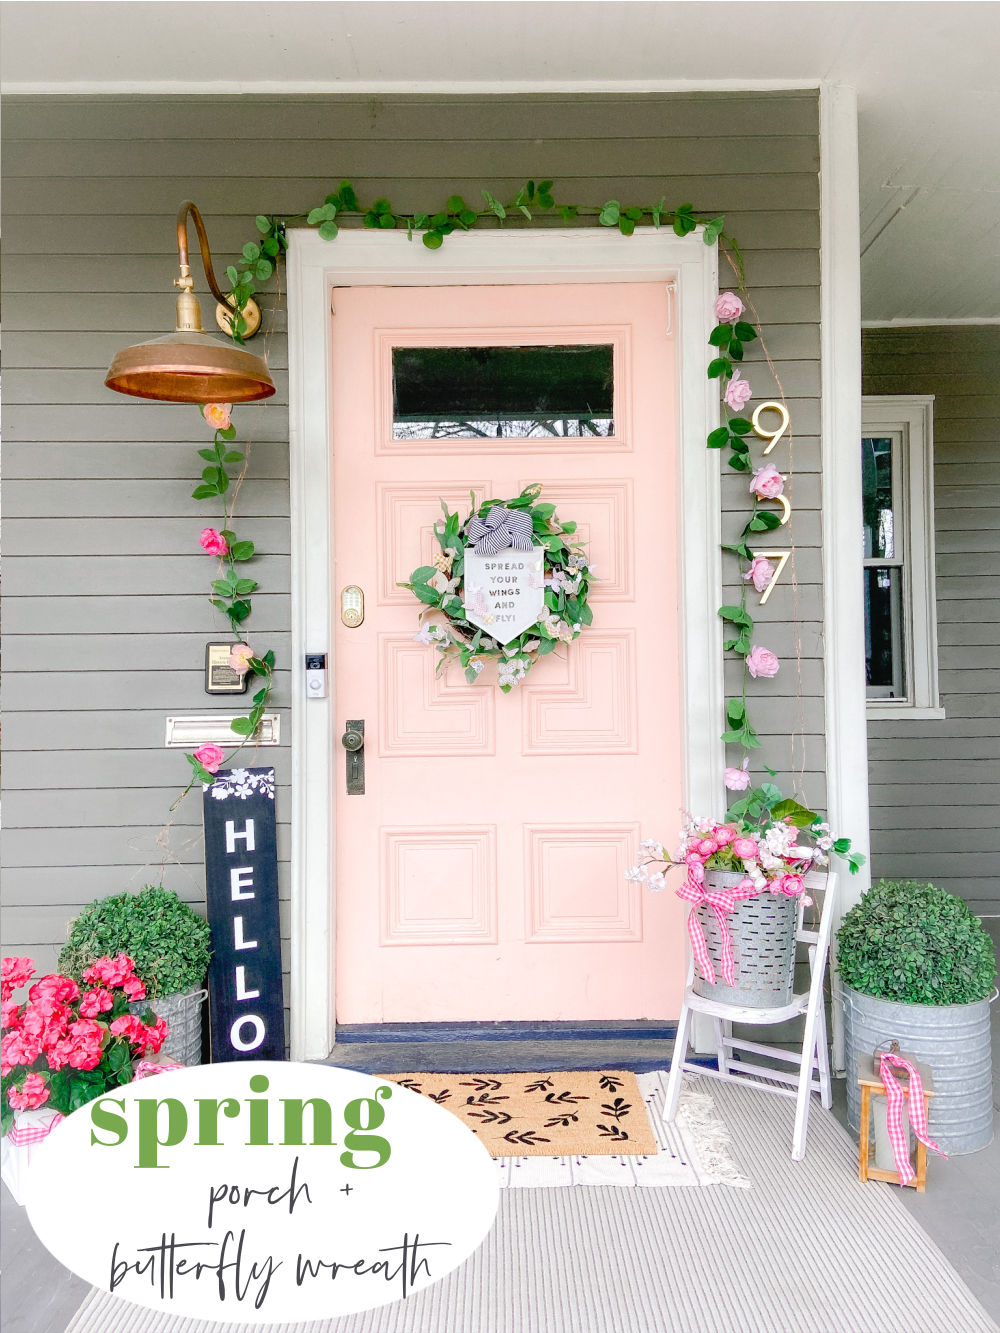 Spring Butterfly Pennant Wreath. Celebrate spring by making this simple wreath with butterflies cut out of cardstock and a big pennant in the middle and a spring saying!